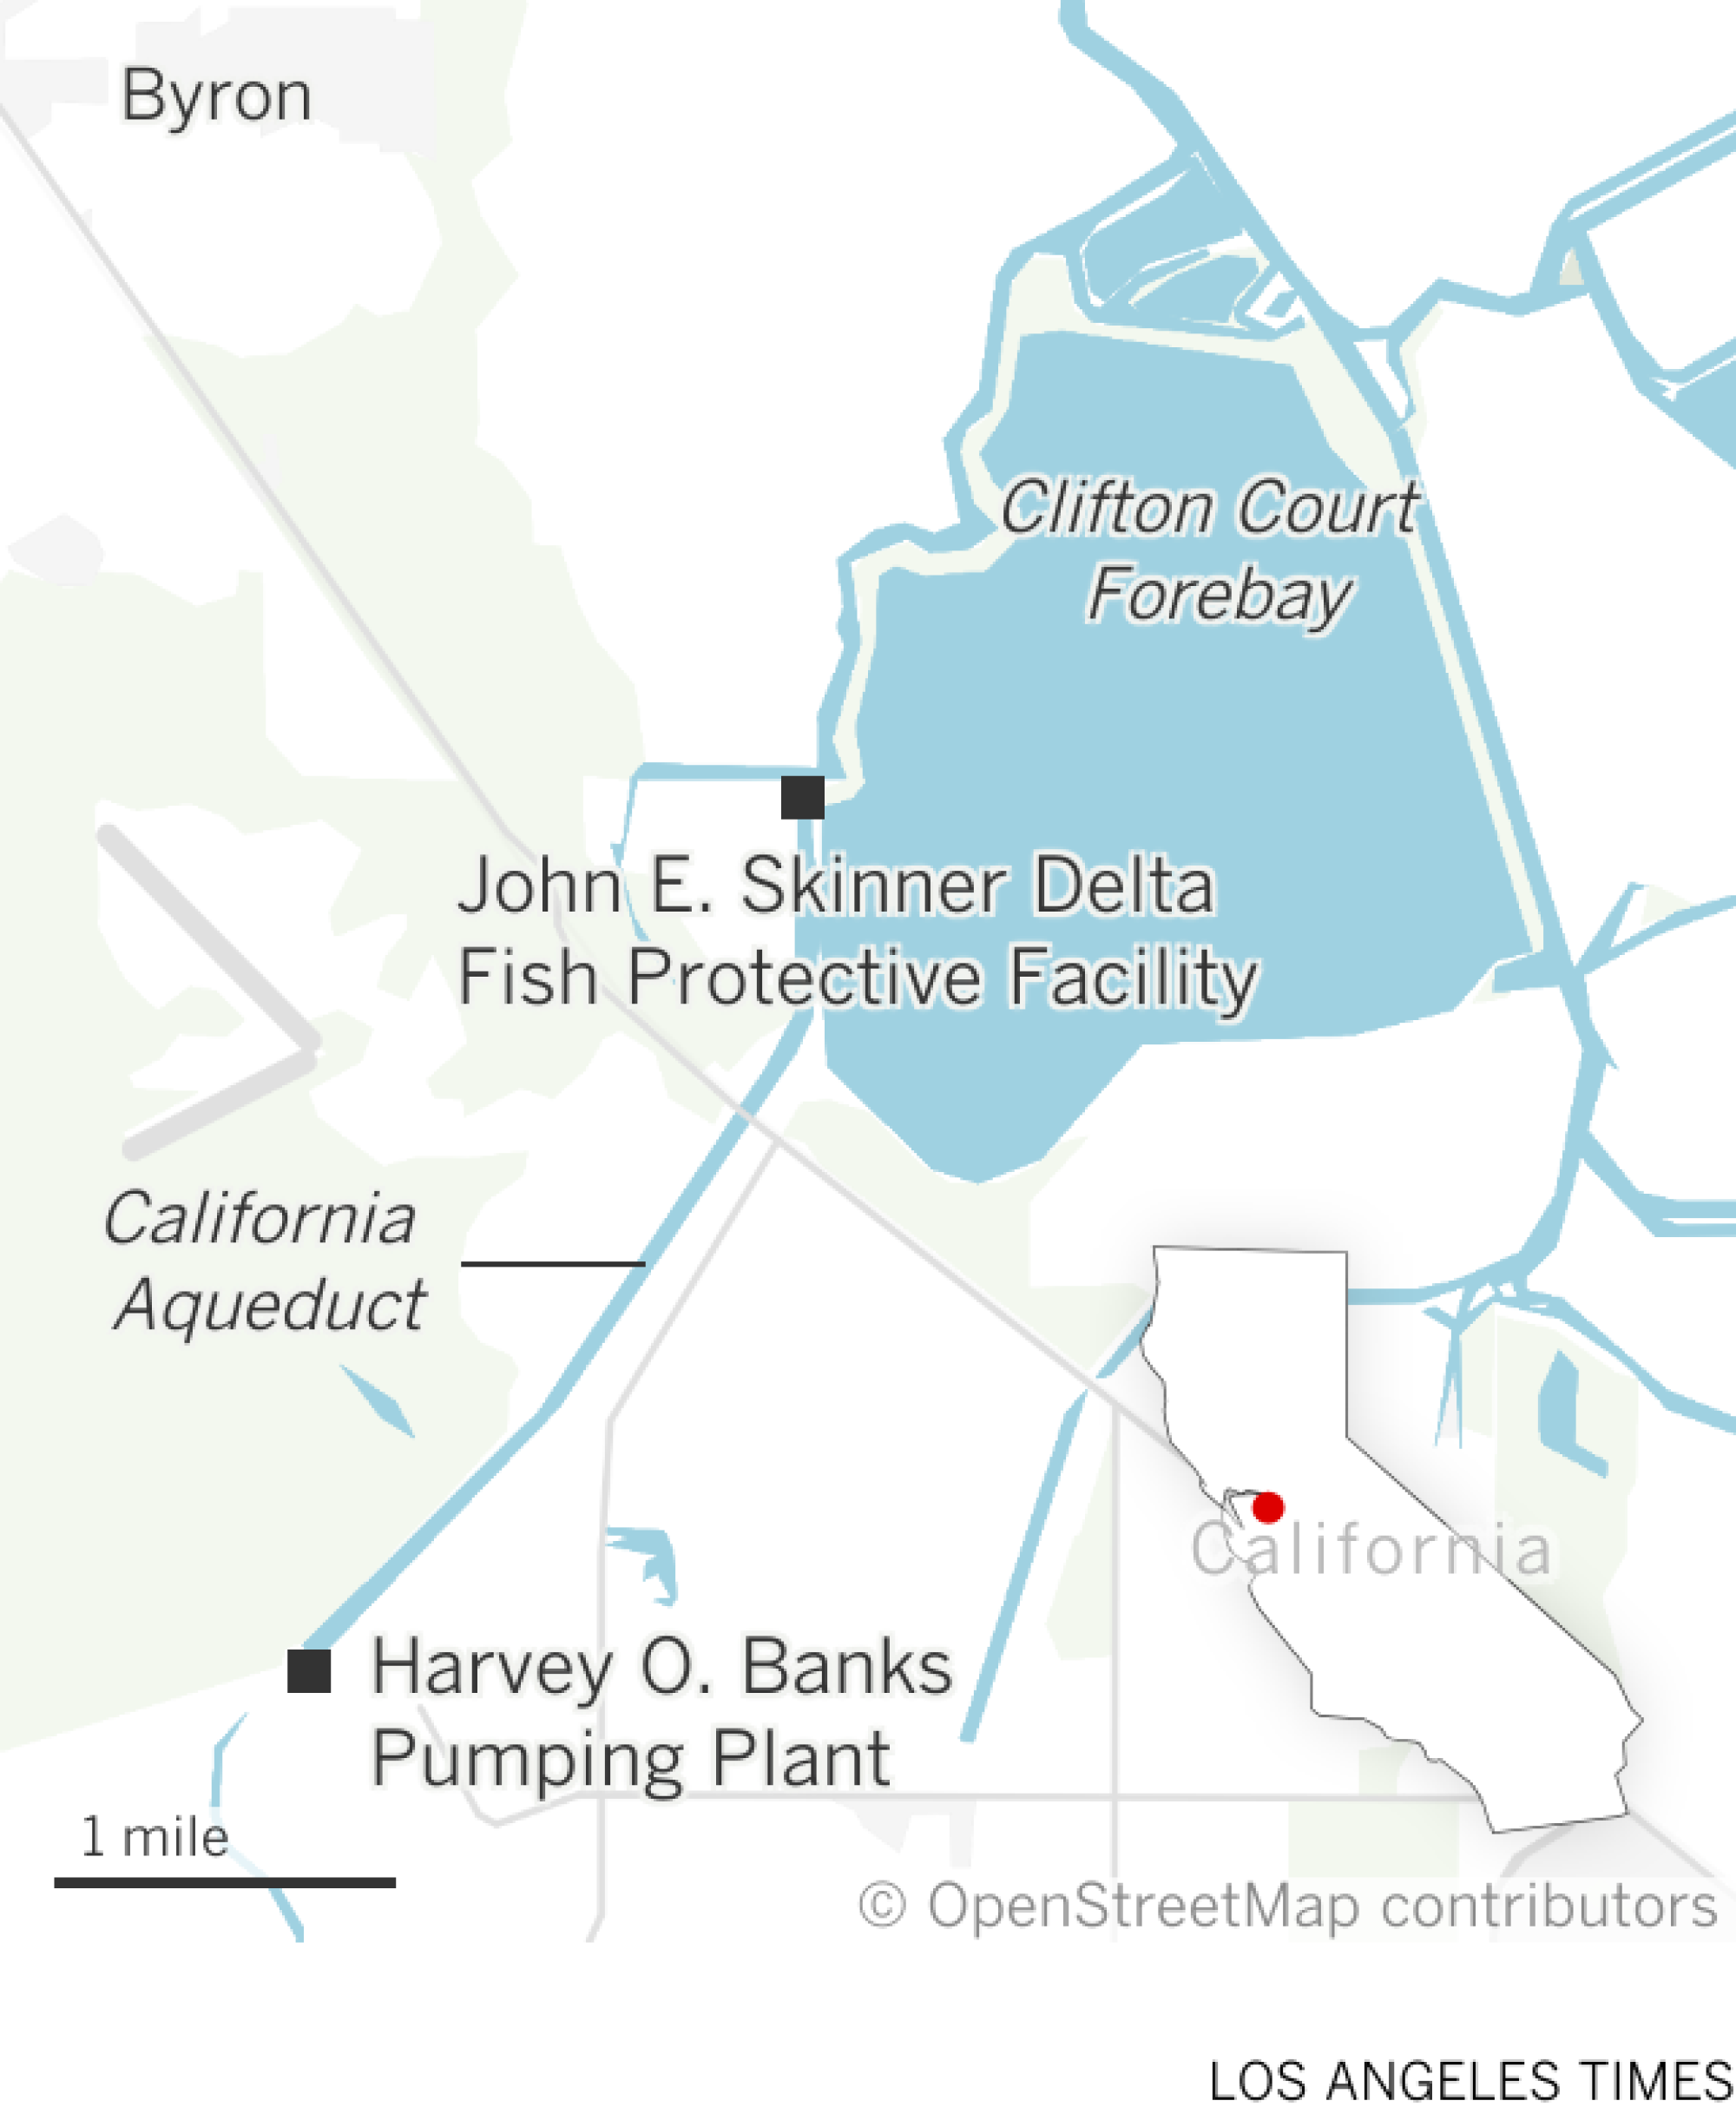 Map shows a close up of the area of Byron, California, that includes the Clifton Court Forebay. The John E. Skinner Delta Fish Protective Facility is located on the western side of the Clifton Court Forebay, and the Harvey O. Banks Pumping Plant is located further south, along the California Aqueduct.